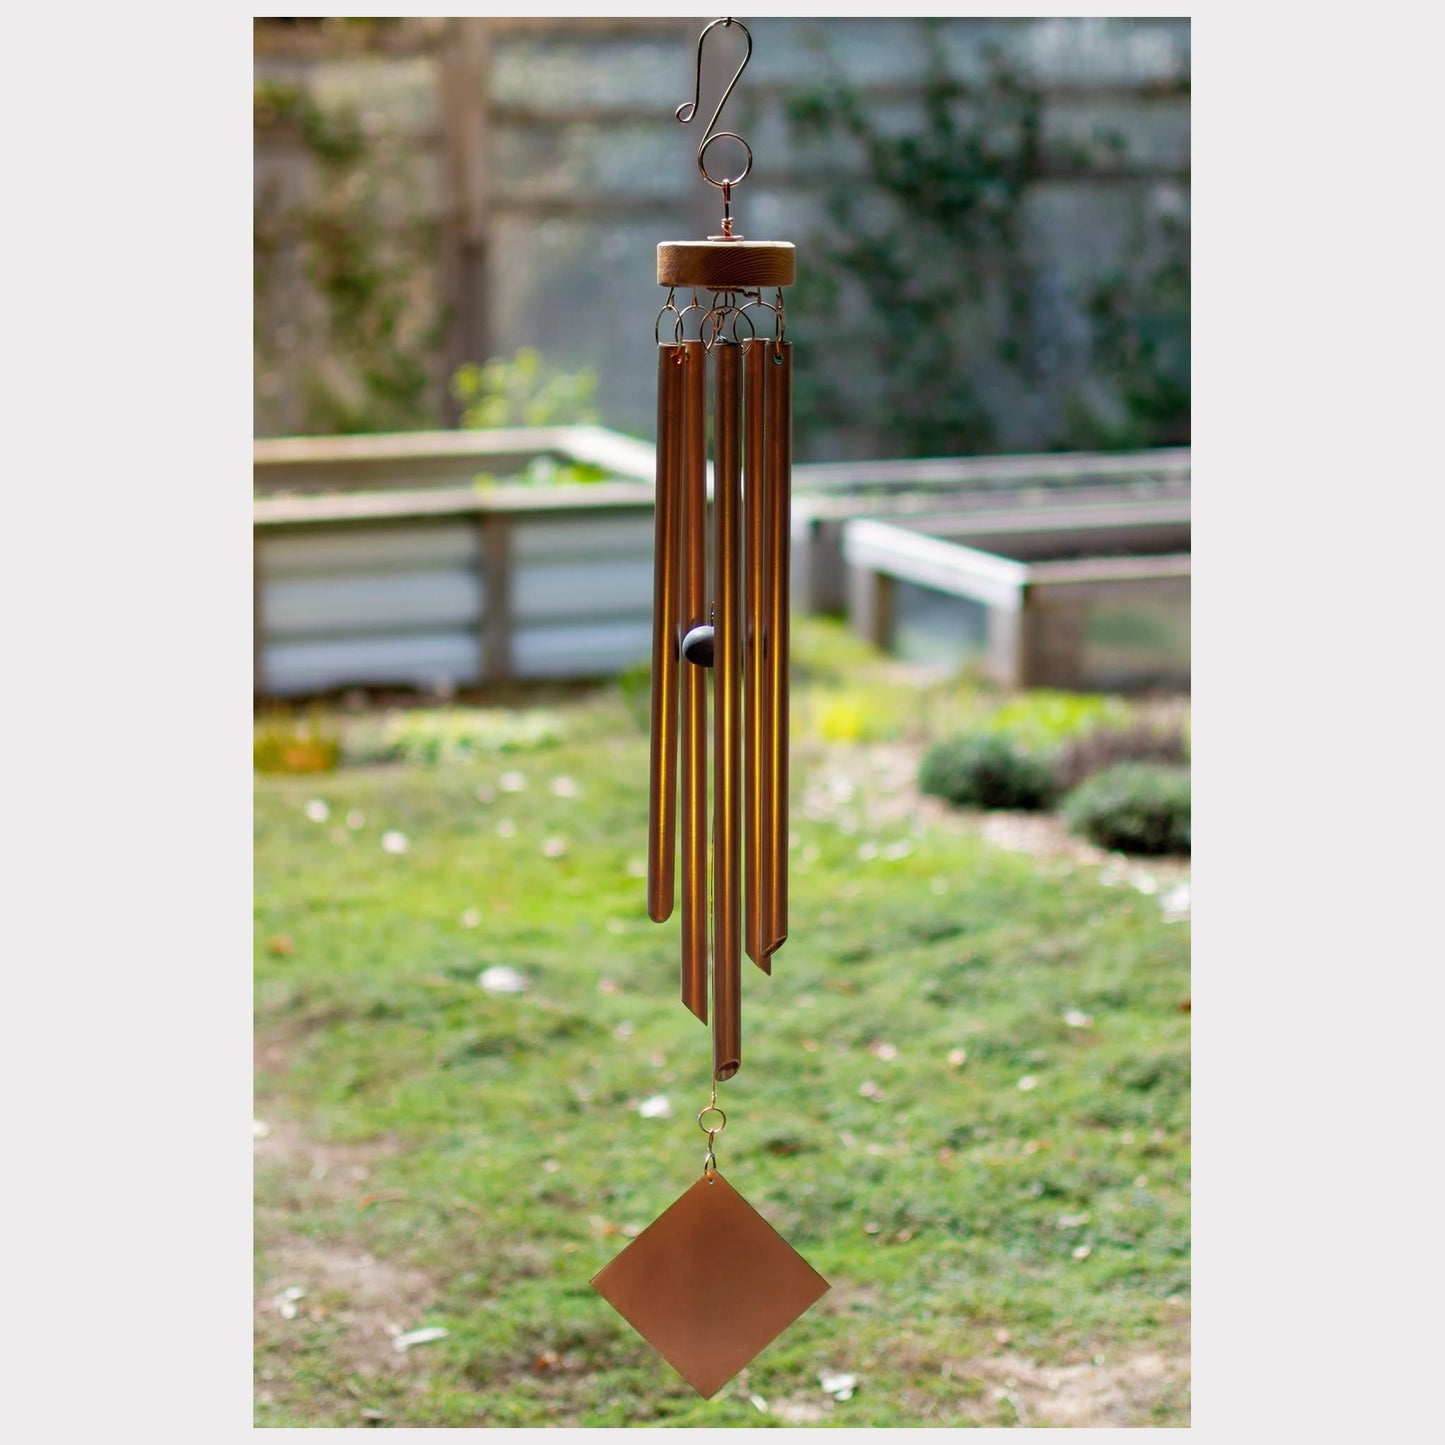 Handcrafted copper wind chime.